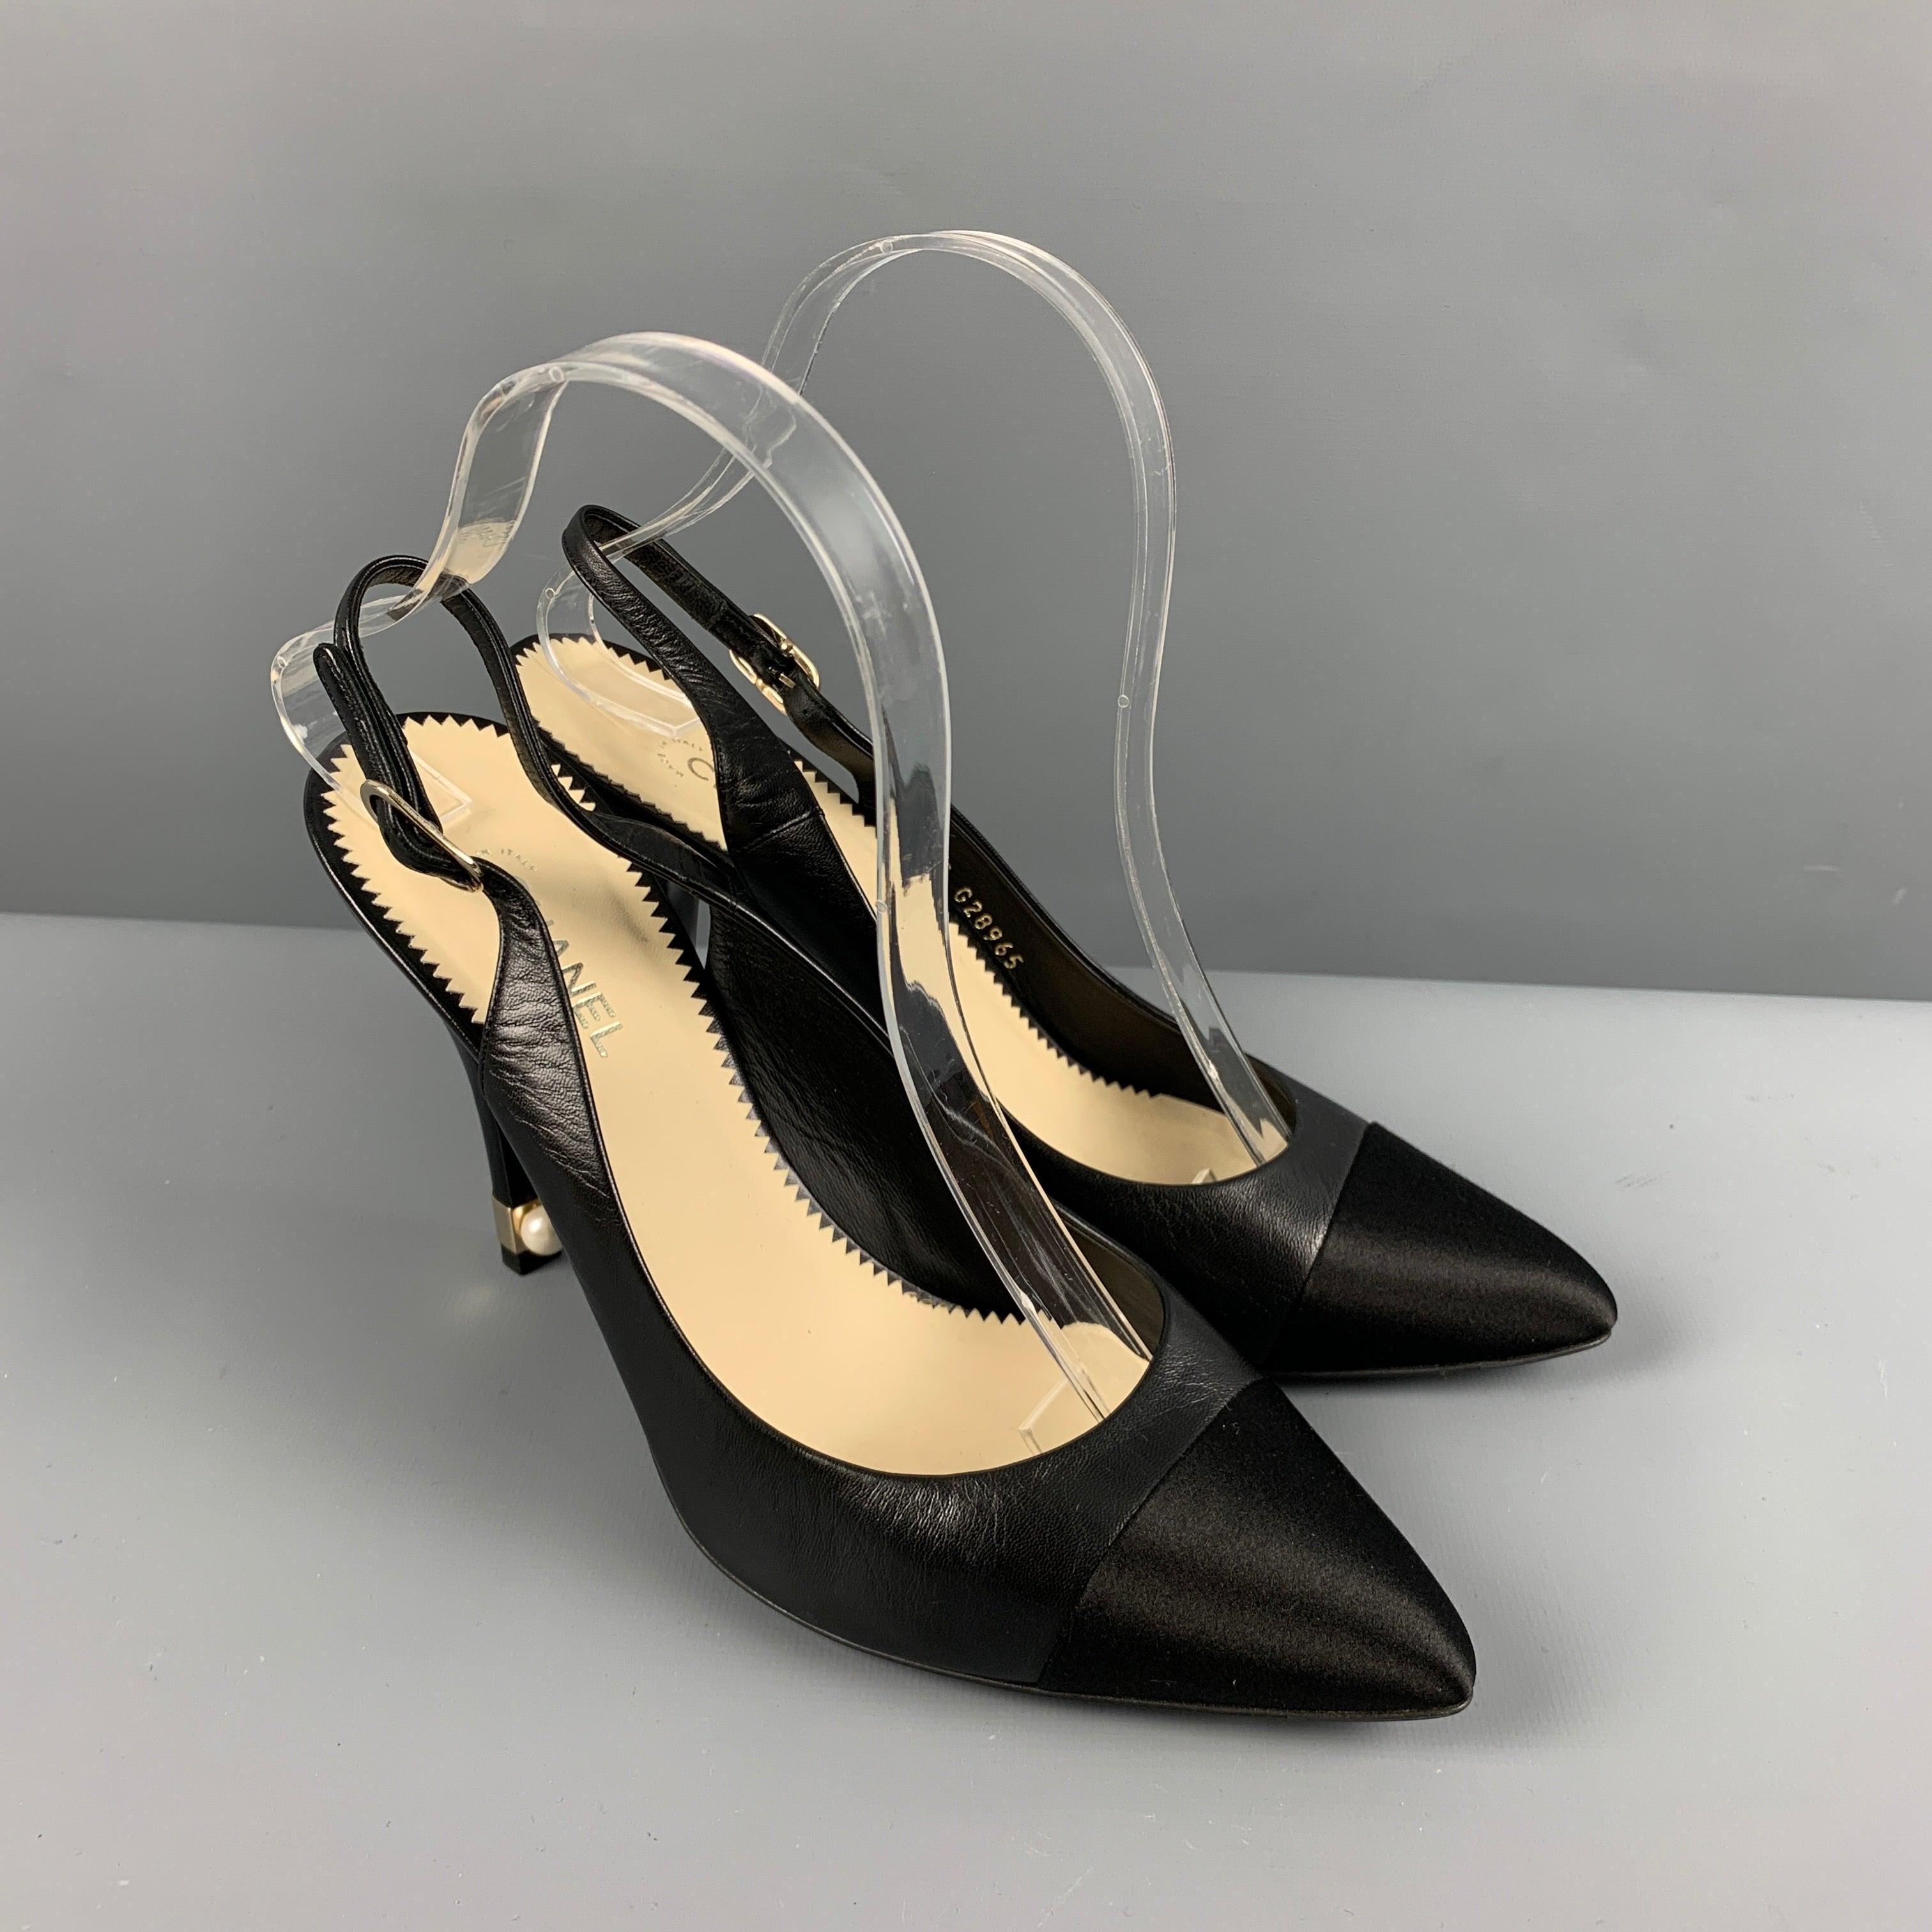 CHANEL pumps
in a black leather featuring a slingback style, pearl heel detail, and luxurious gold tone hardware. Comes with dust bags. Made in Italy. Very Good Pre-Owned Condition. Minor signs of wear. 

Marked:   G G28965 

Measurements: 
  Heel: